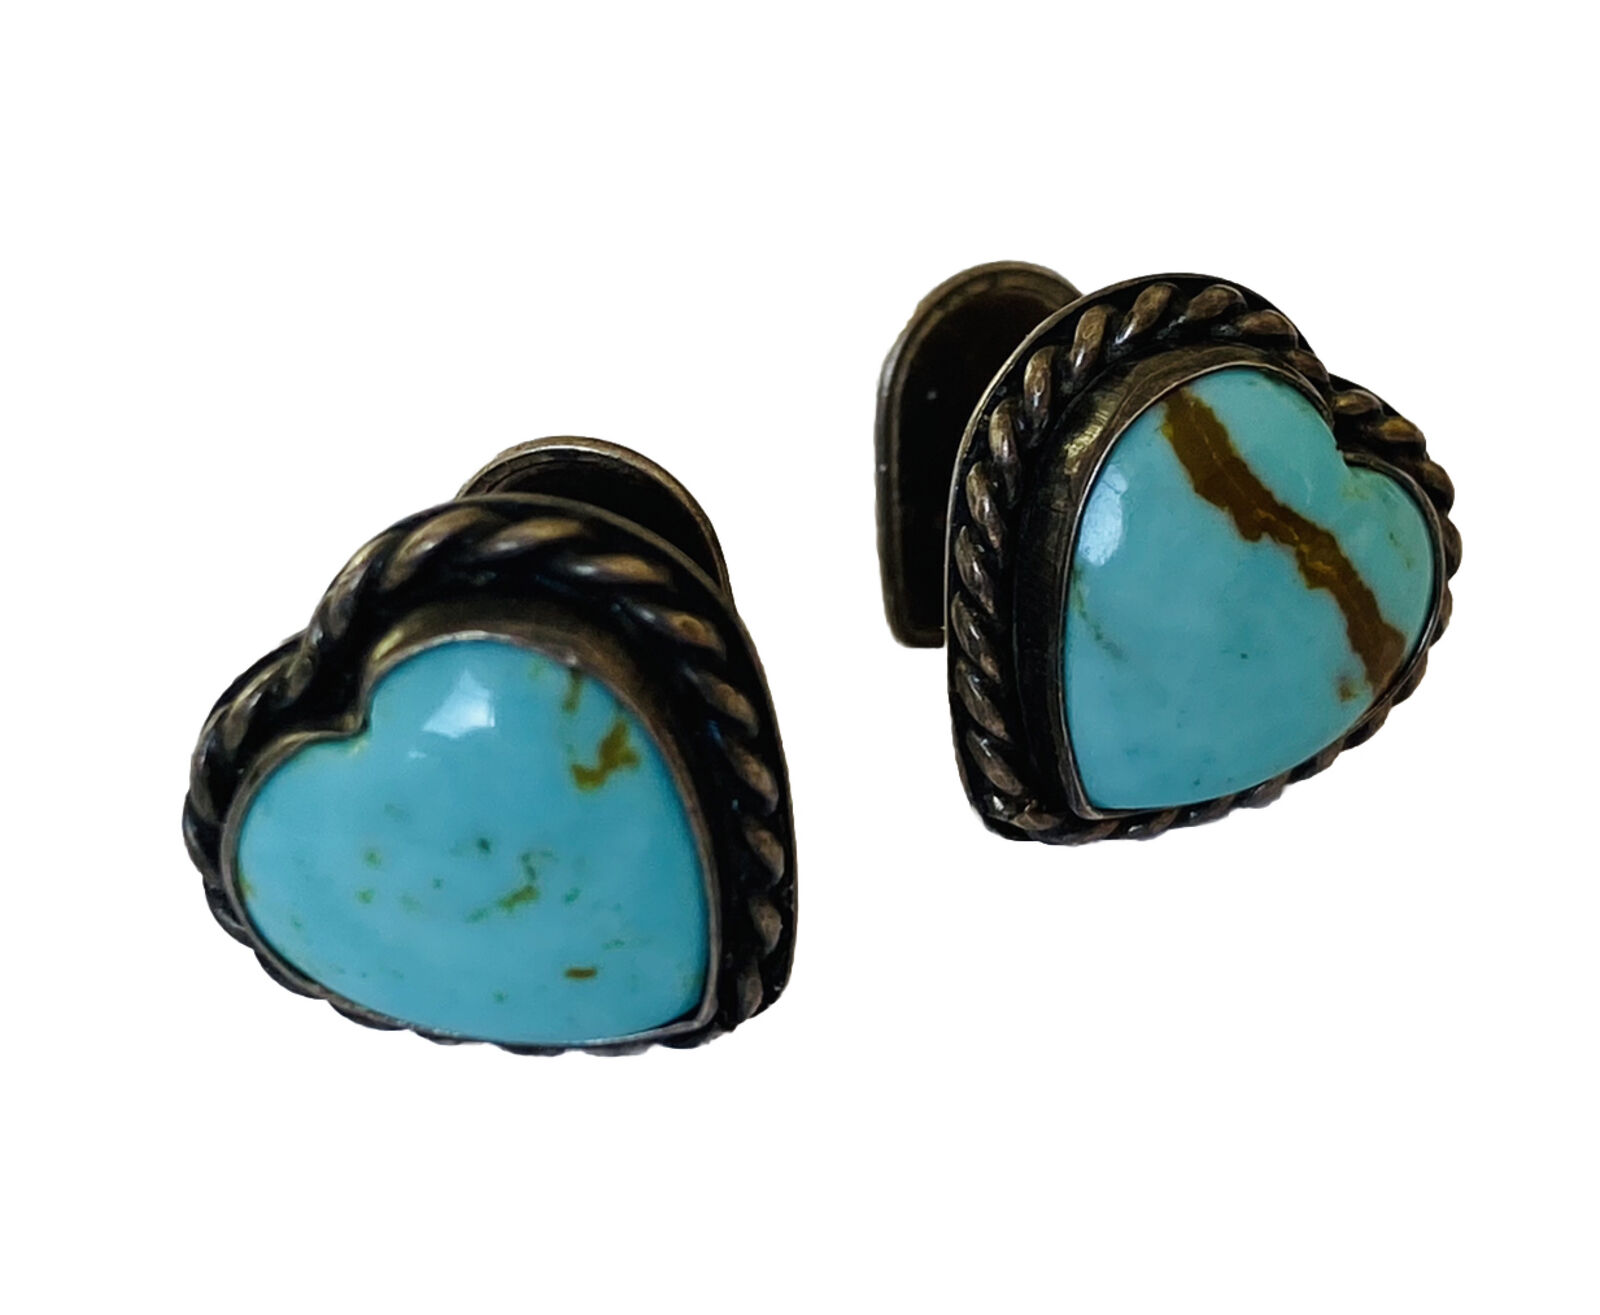 Vintage Navajo Native American Sterling Silver Turquoise Heart Cufflinks